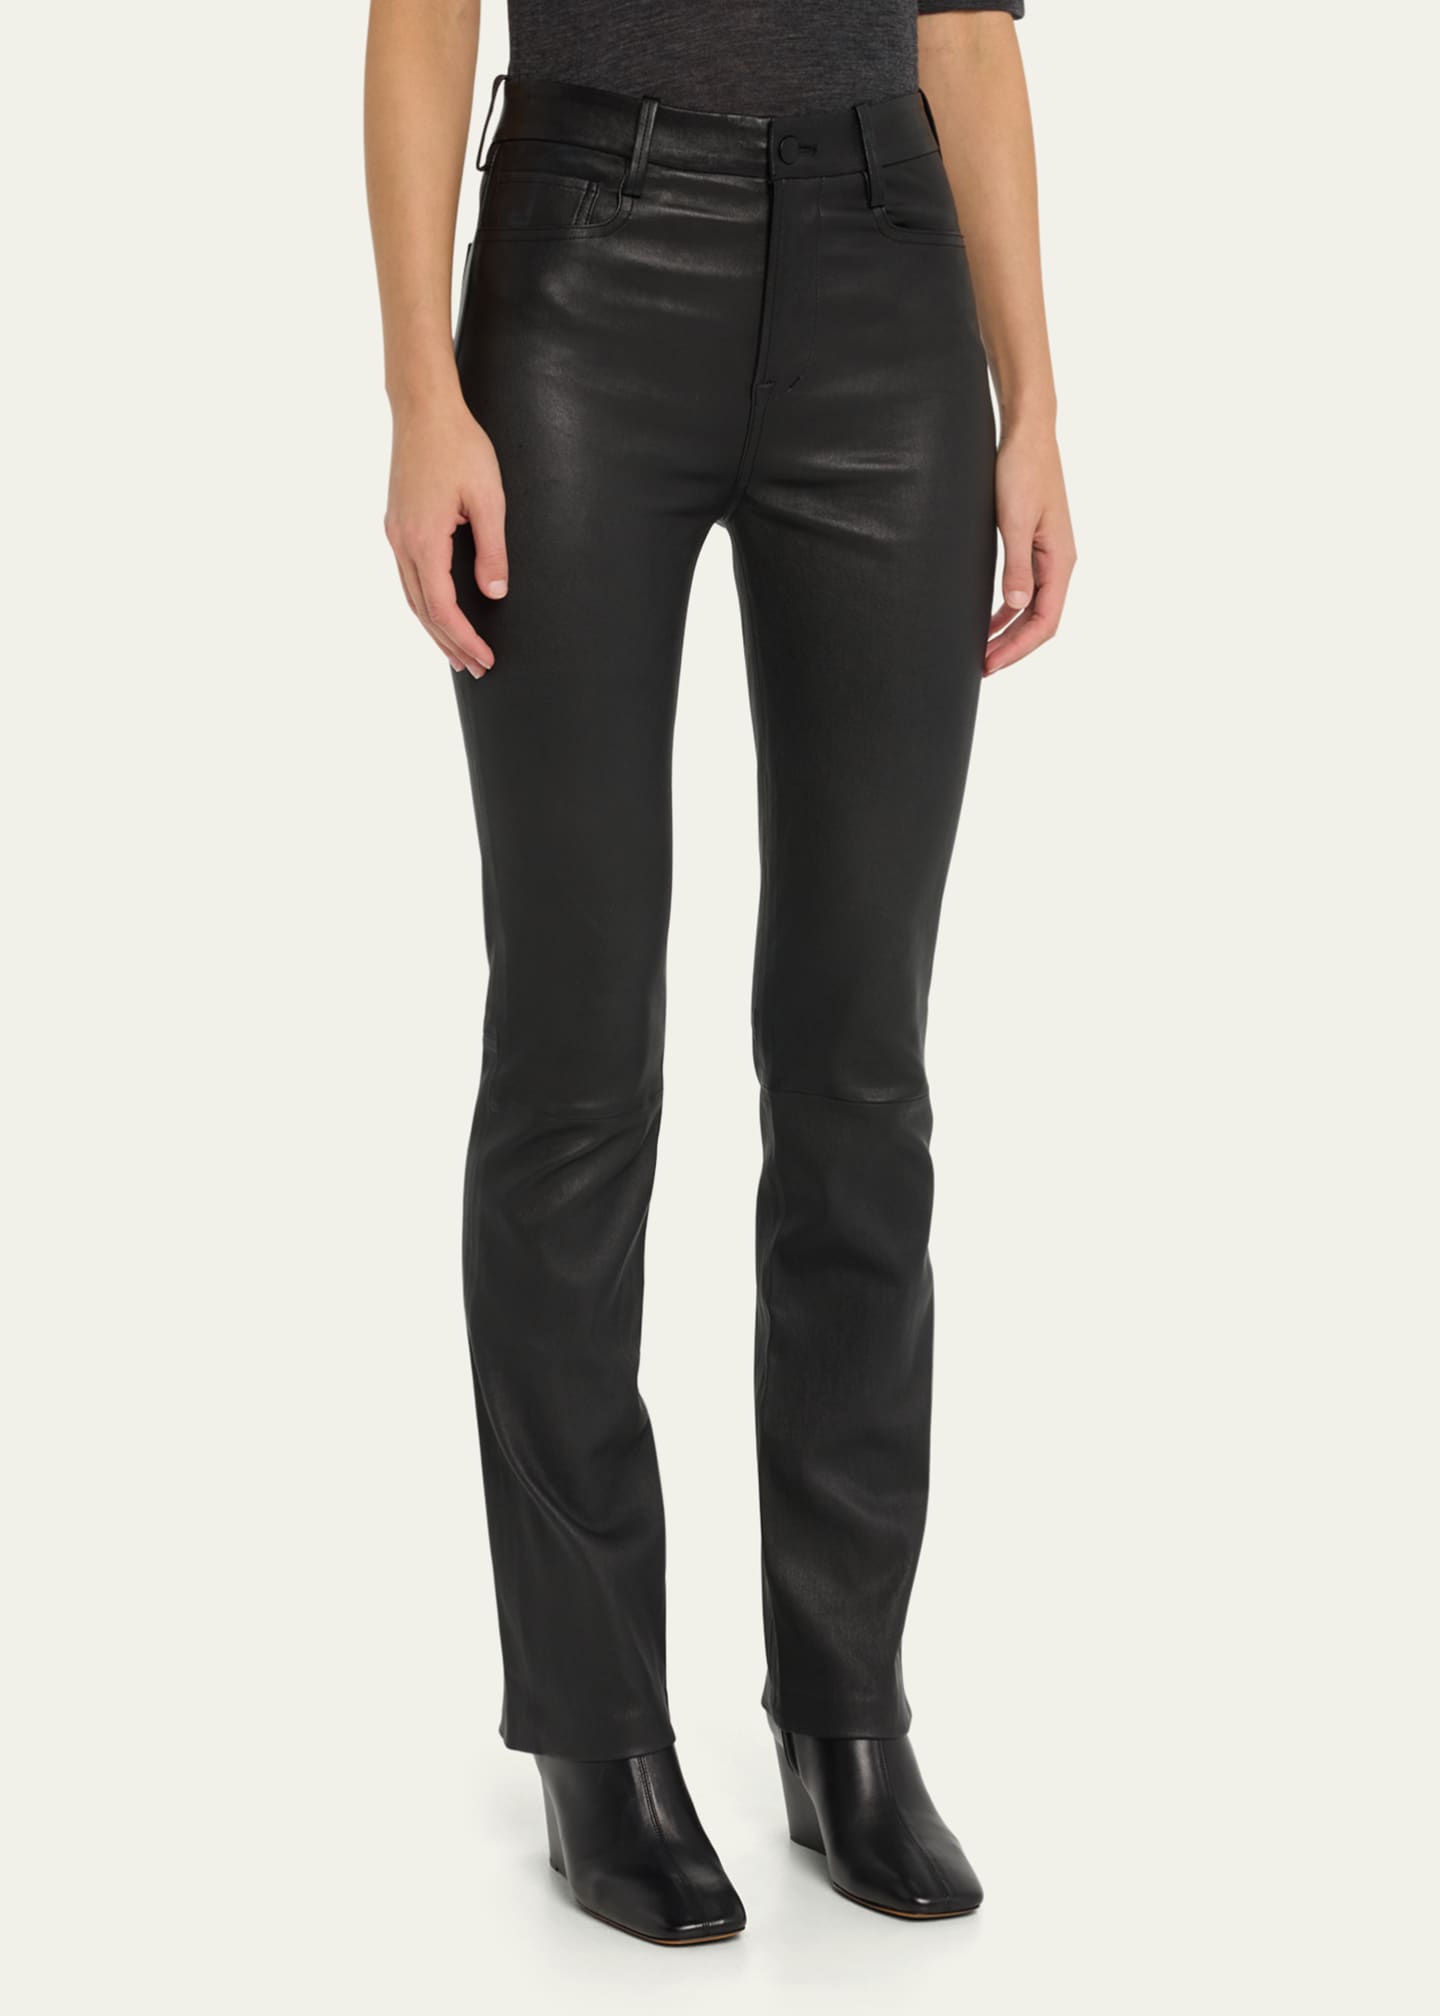 Vince Bootcut Stretch Leather Pants - Bergdorf Goodman